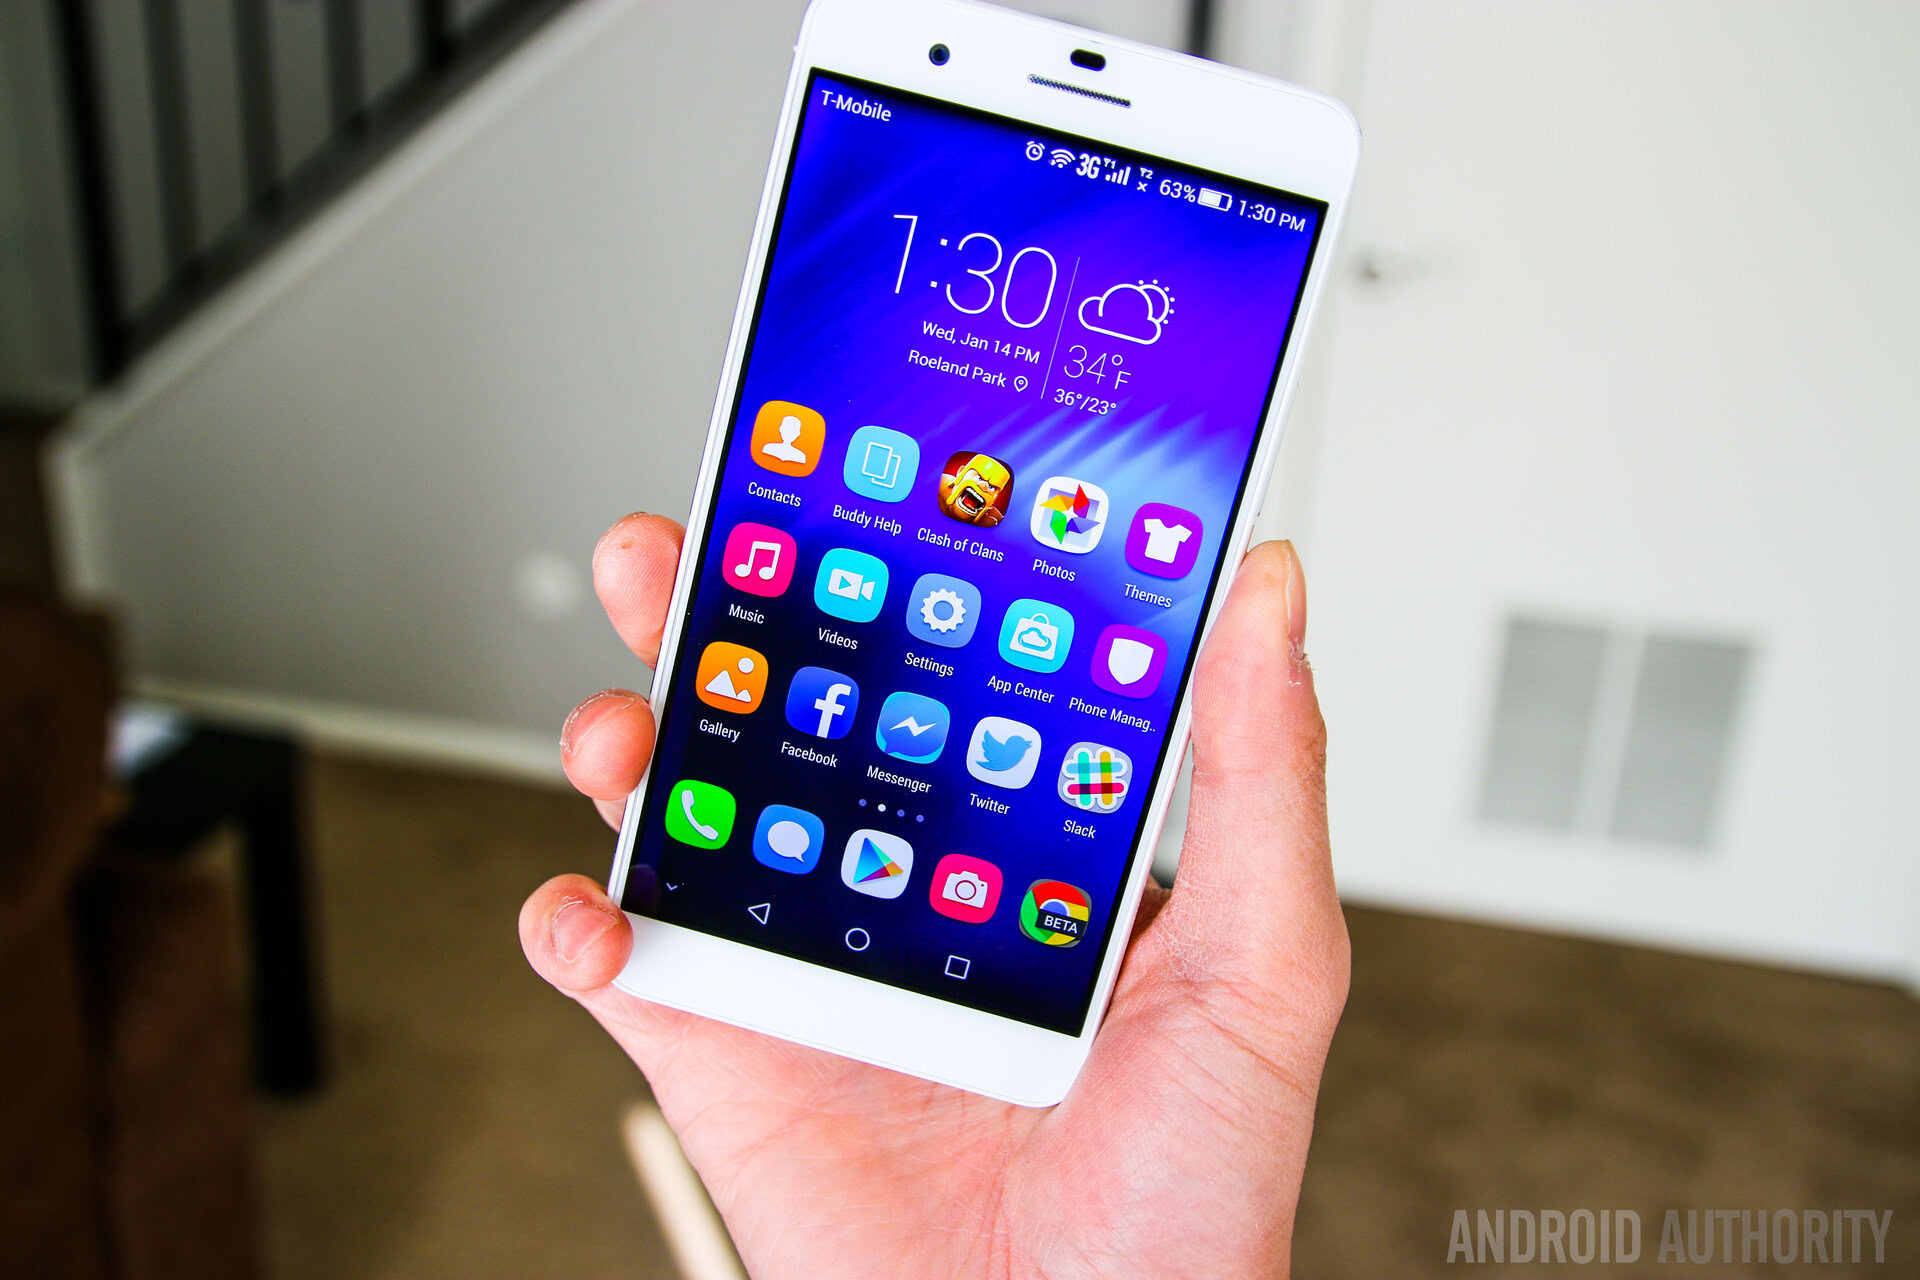 Geheim kijk in Dicteren HUAWEI HONOR 6 Plus hands-on and first impressions